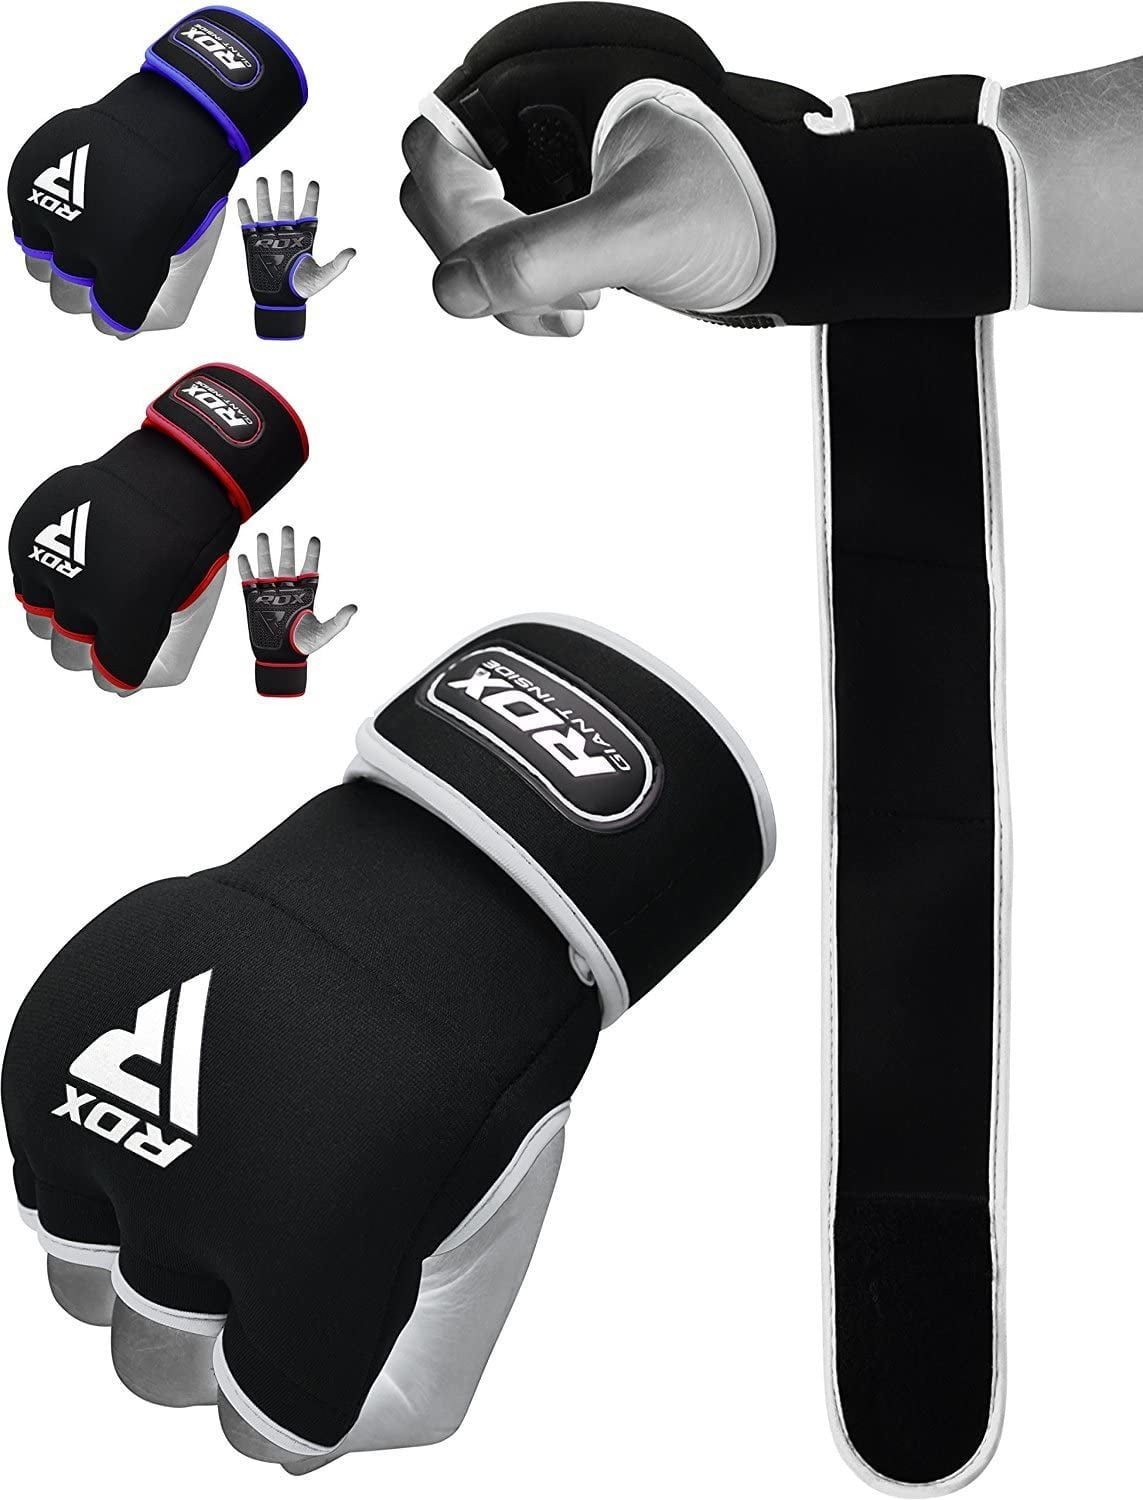 Ard Boxing Fist Inner Gloves Hand Wraps Muay Thai Boxing Martial Arts BLUE S-XL 